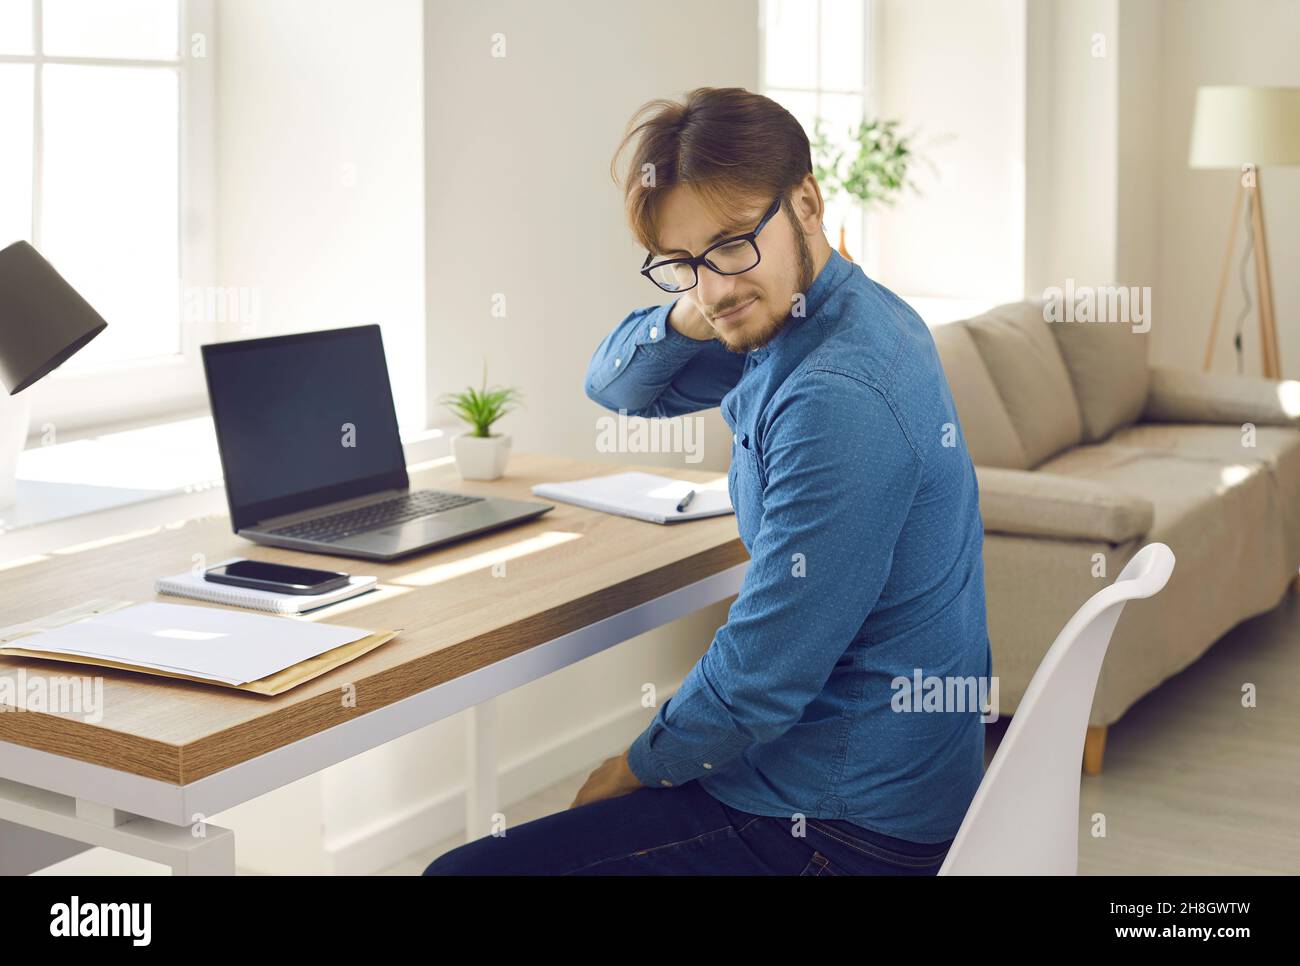 Tired man who has neck pain sitting at his desk and working on his laptop computer Stock Photo